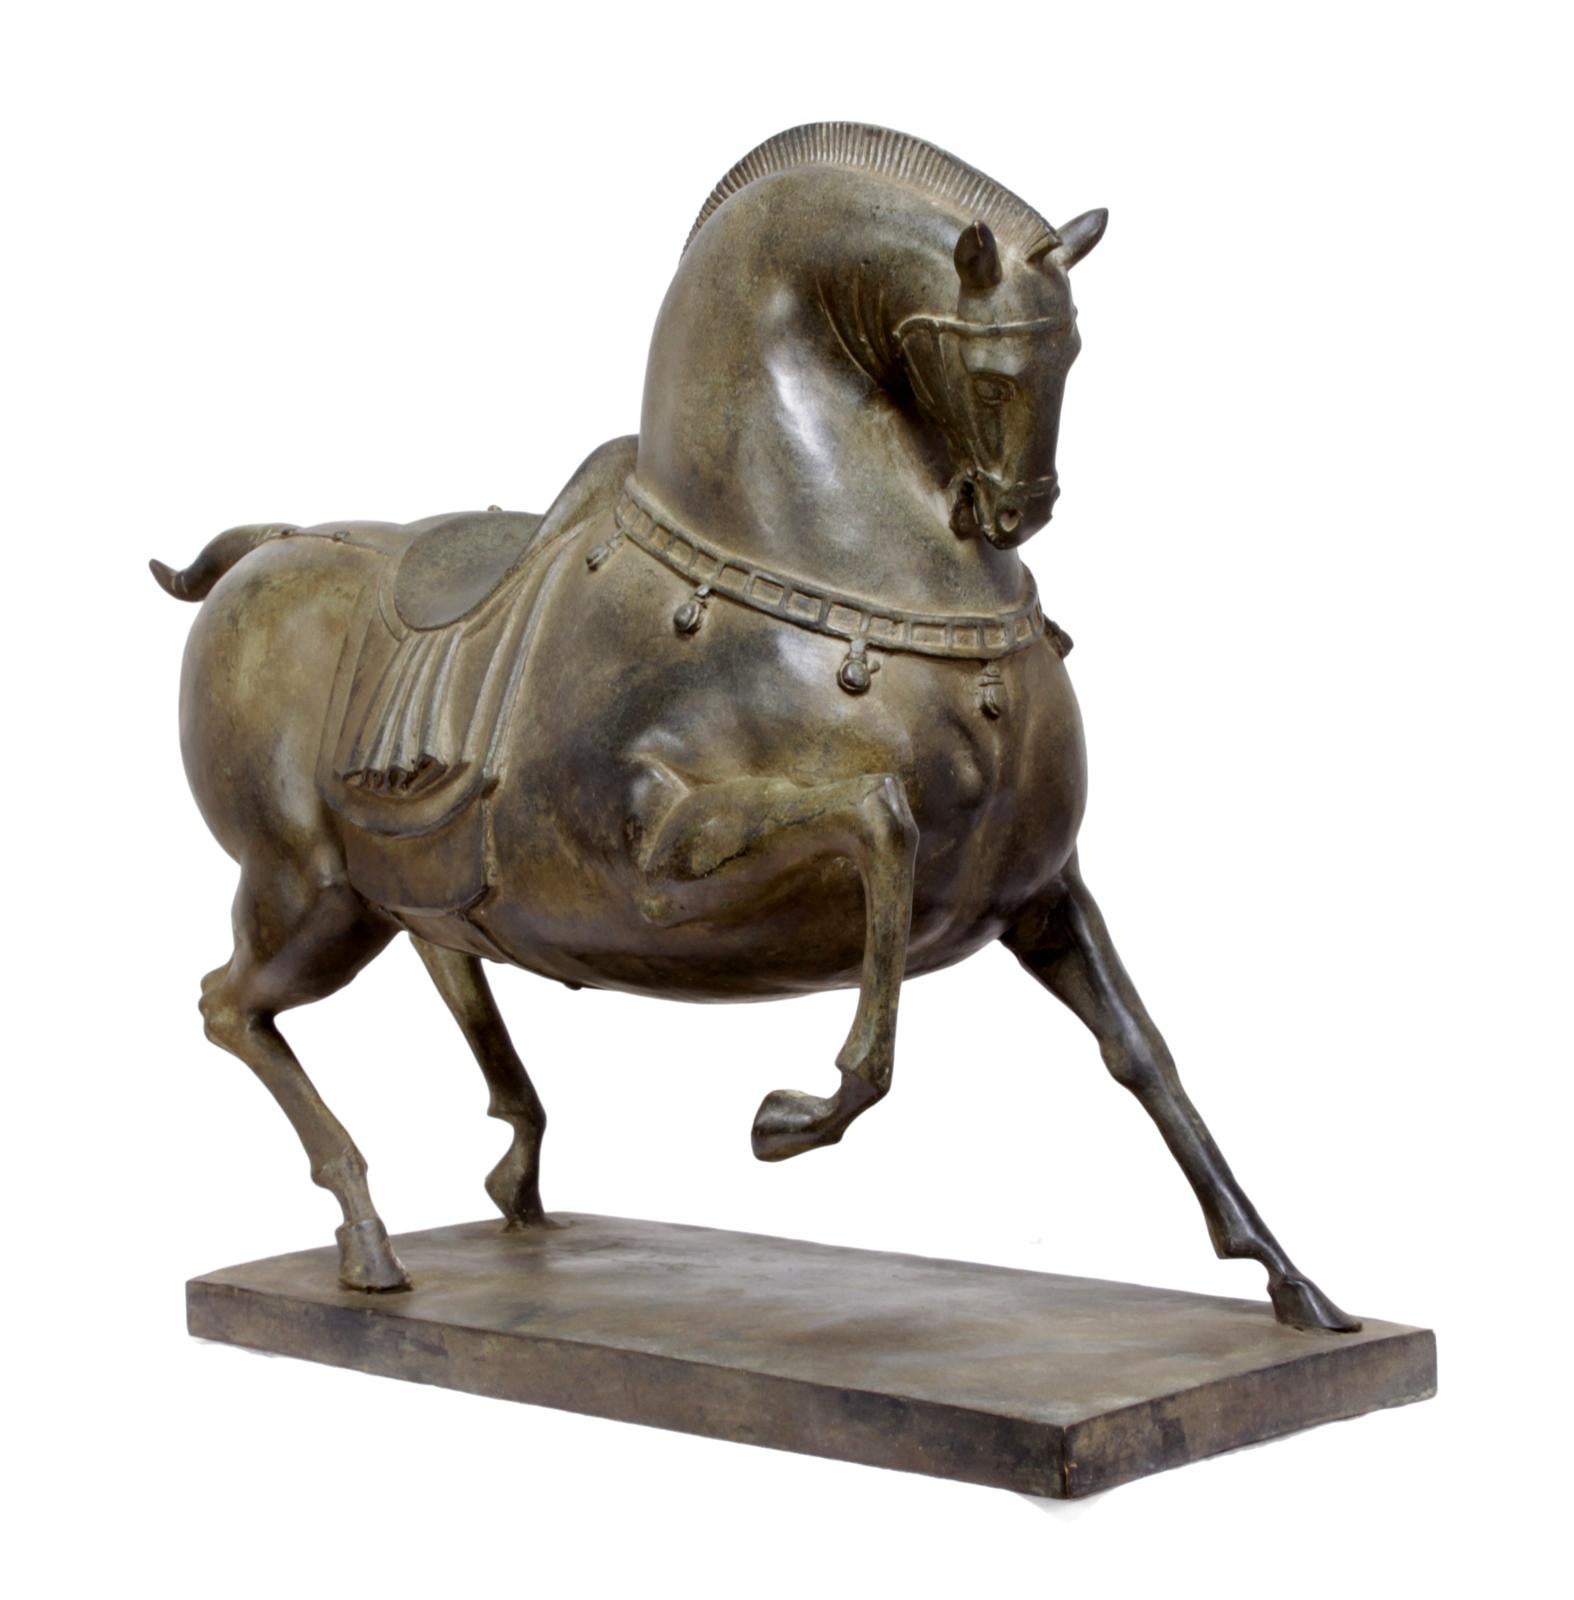 Bronze horse sculpture, circa 1950 

A bronze study of a stylised overweight dressage horse produced in bronze with verde green patina

Age: 1950

Style: Mid-Century Modern

Material: Bronze

Condition: Very good

Dimensions: 38 H x 52 W